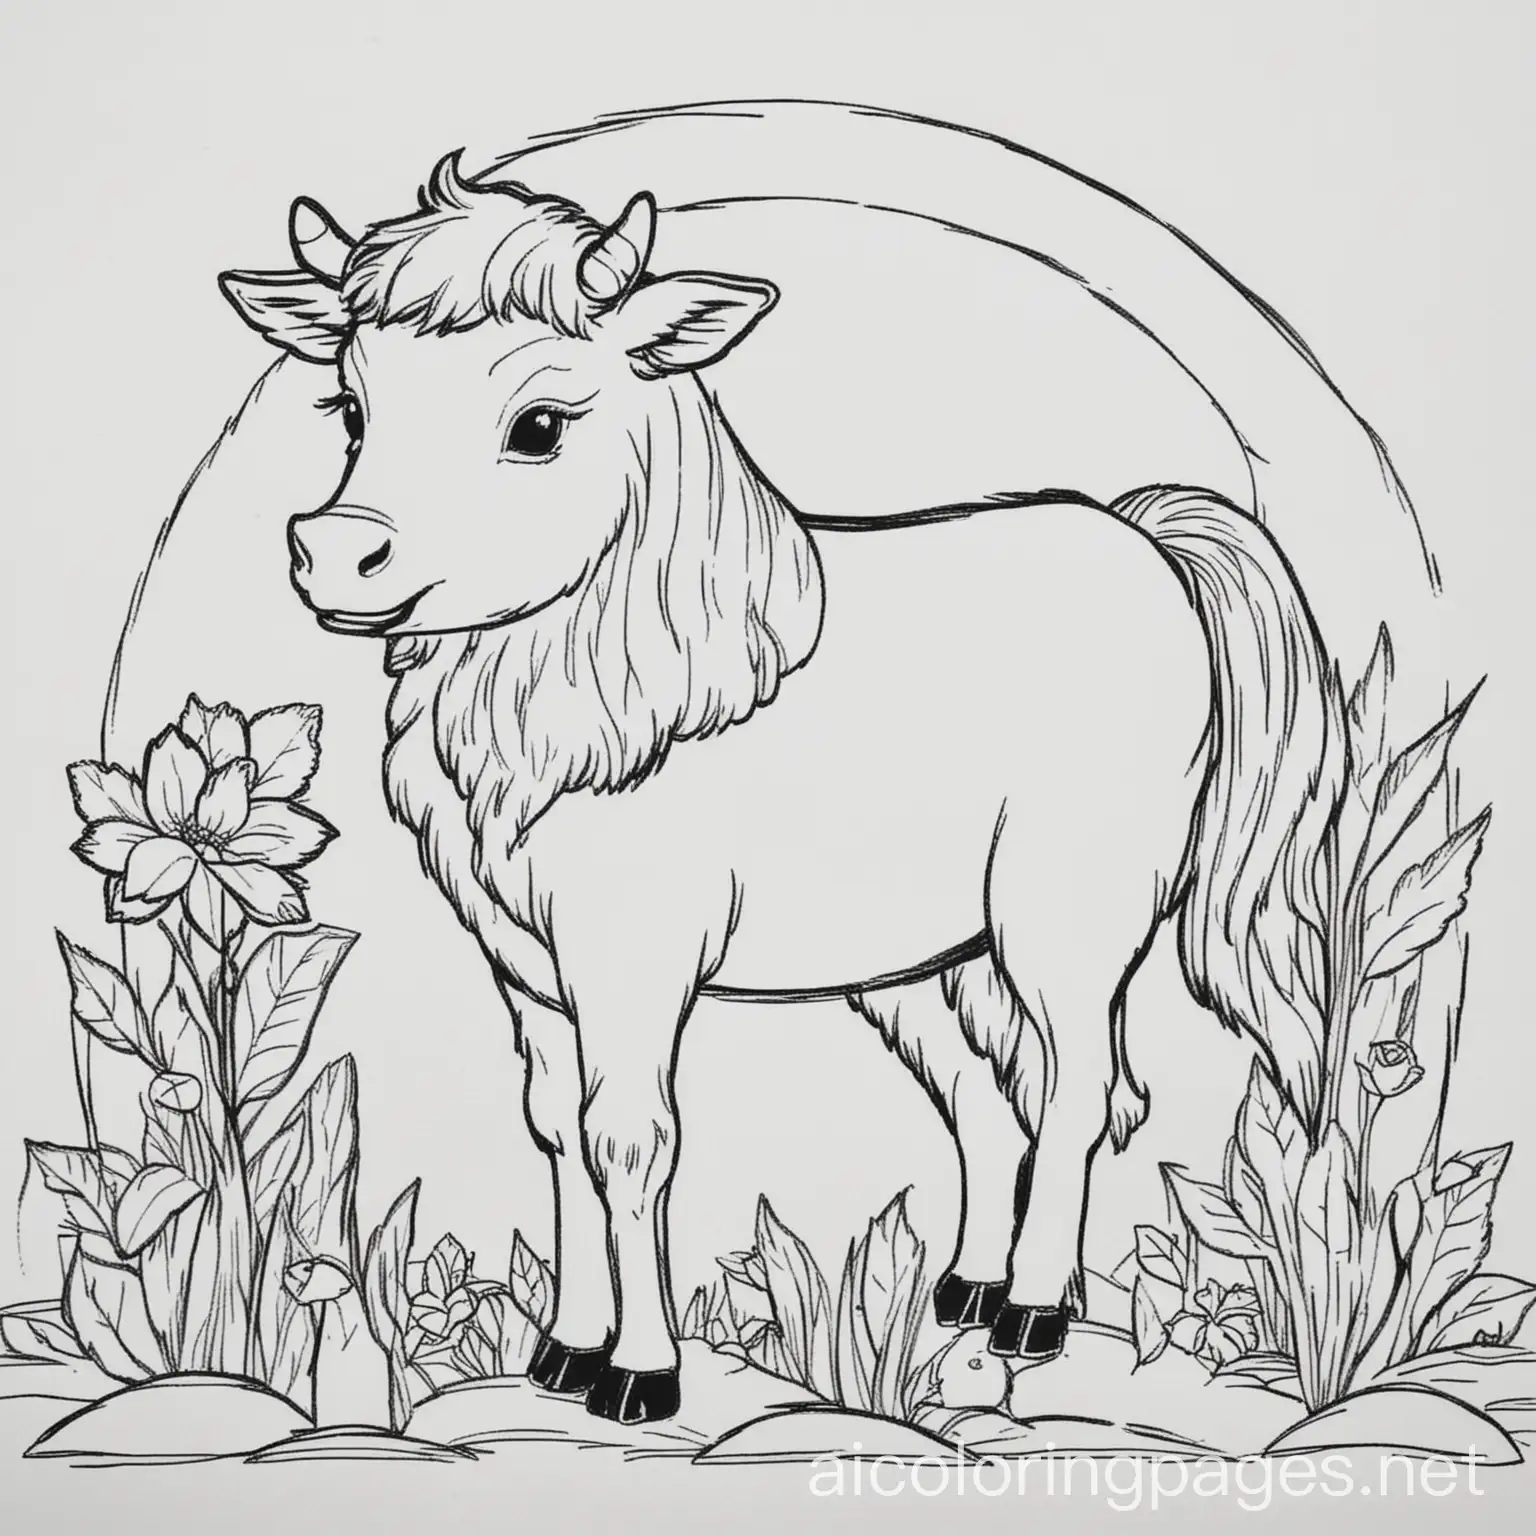 farm animal, Coloring Page, black and white, line art, white background, Simplicity, Ample White Space. The background of the coloring page is plain white to make it easy for young children to color within the lines. The outlines of all the subjects are easy to distinguish, making it simple for kids to color without too much difficulty, Coloring Page, black and white, line art, white background, Simplicity, Ample White Space. The background of the coloring page is plain white to make it easy for young children to color within the lines. The outlines of all the subjects are easy to distinguish, making it simple for kids to color without too much difficulty